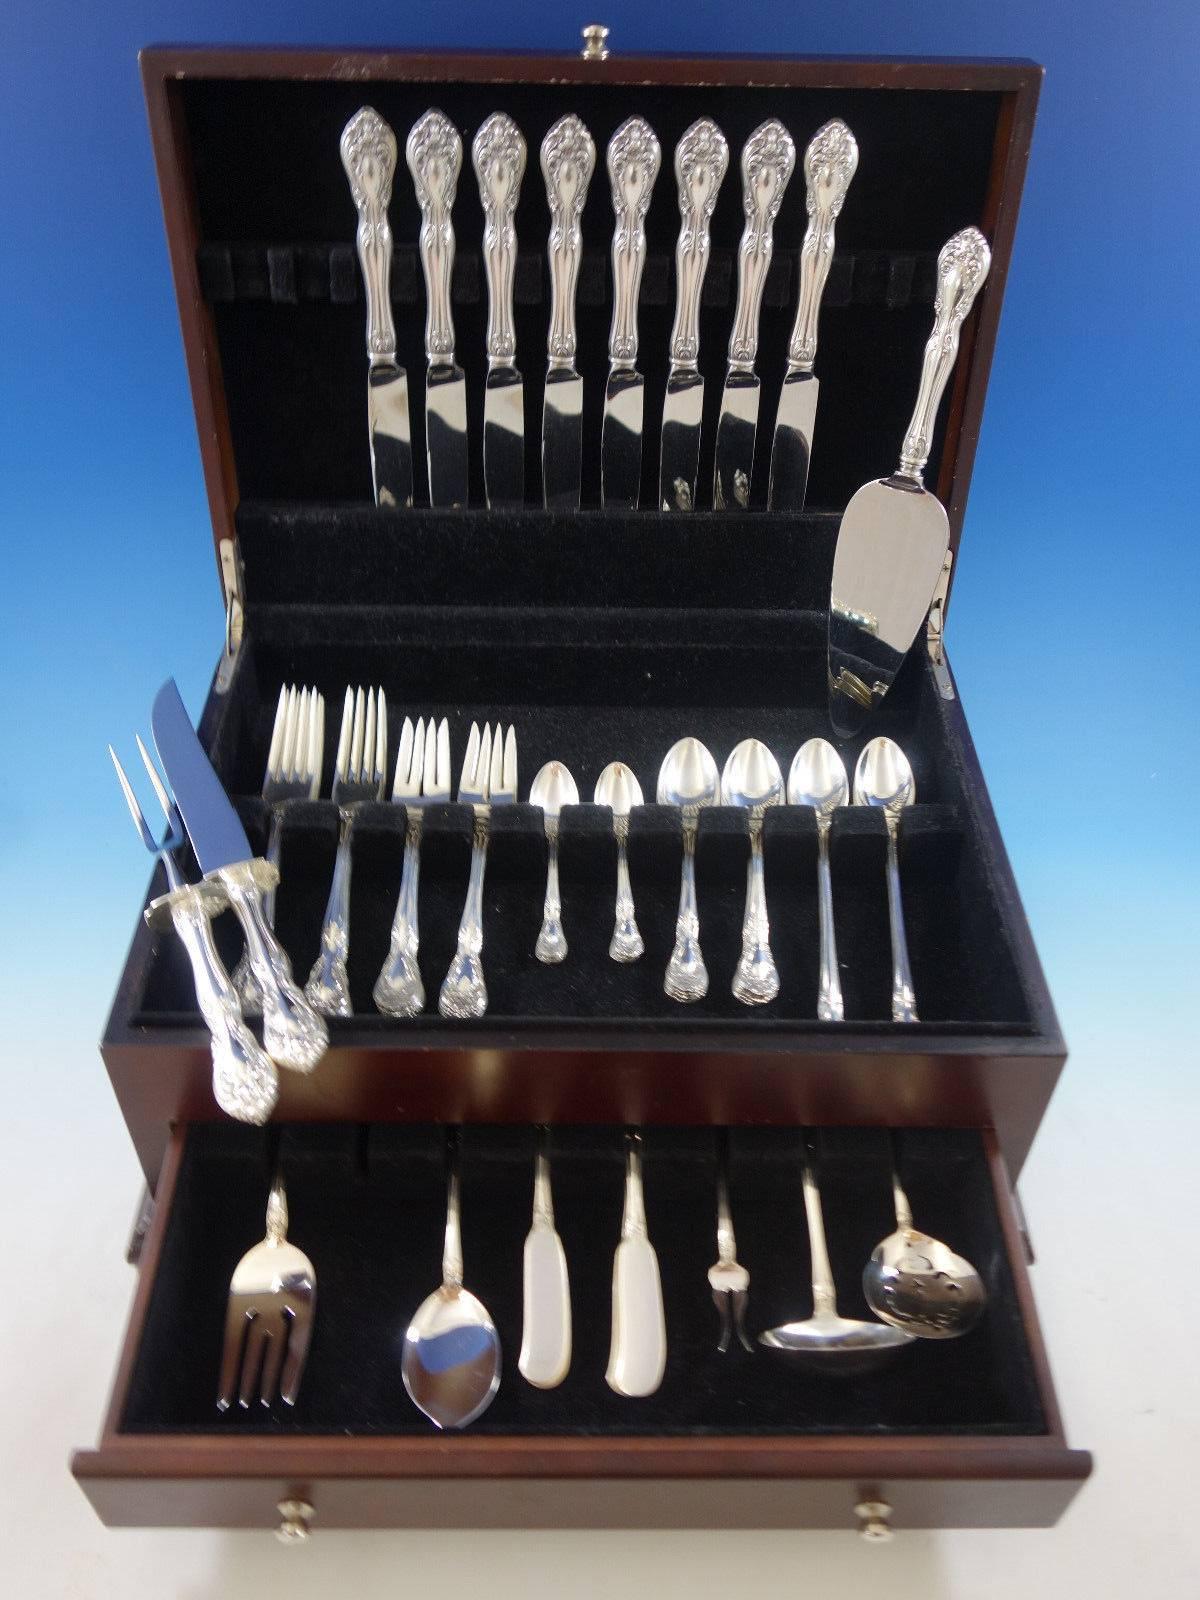 Chateau rose by Alvin sterling silver flatware set, 64 pieces. This set includes: 

eight dinner size knives, 9 1/2